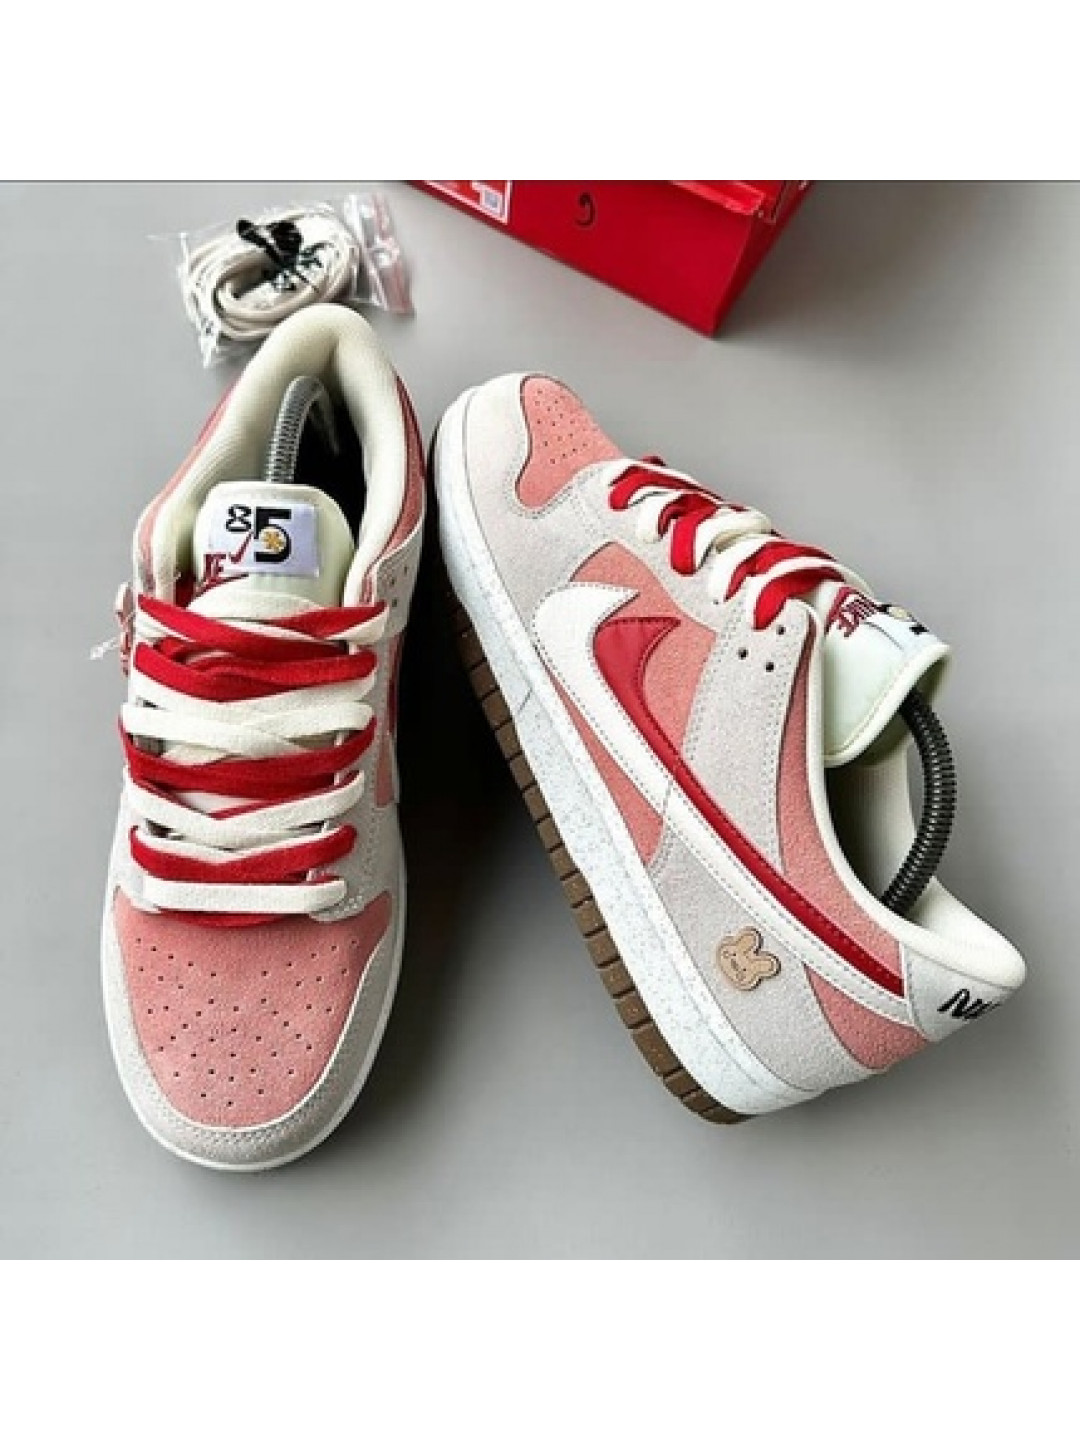 Nike SB Dunk Low Form 85 'White/Pink' Sneakers